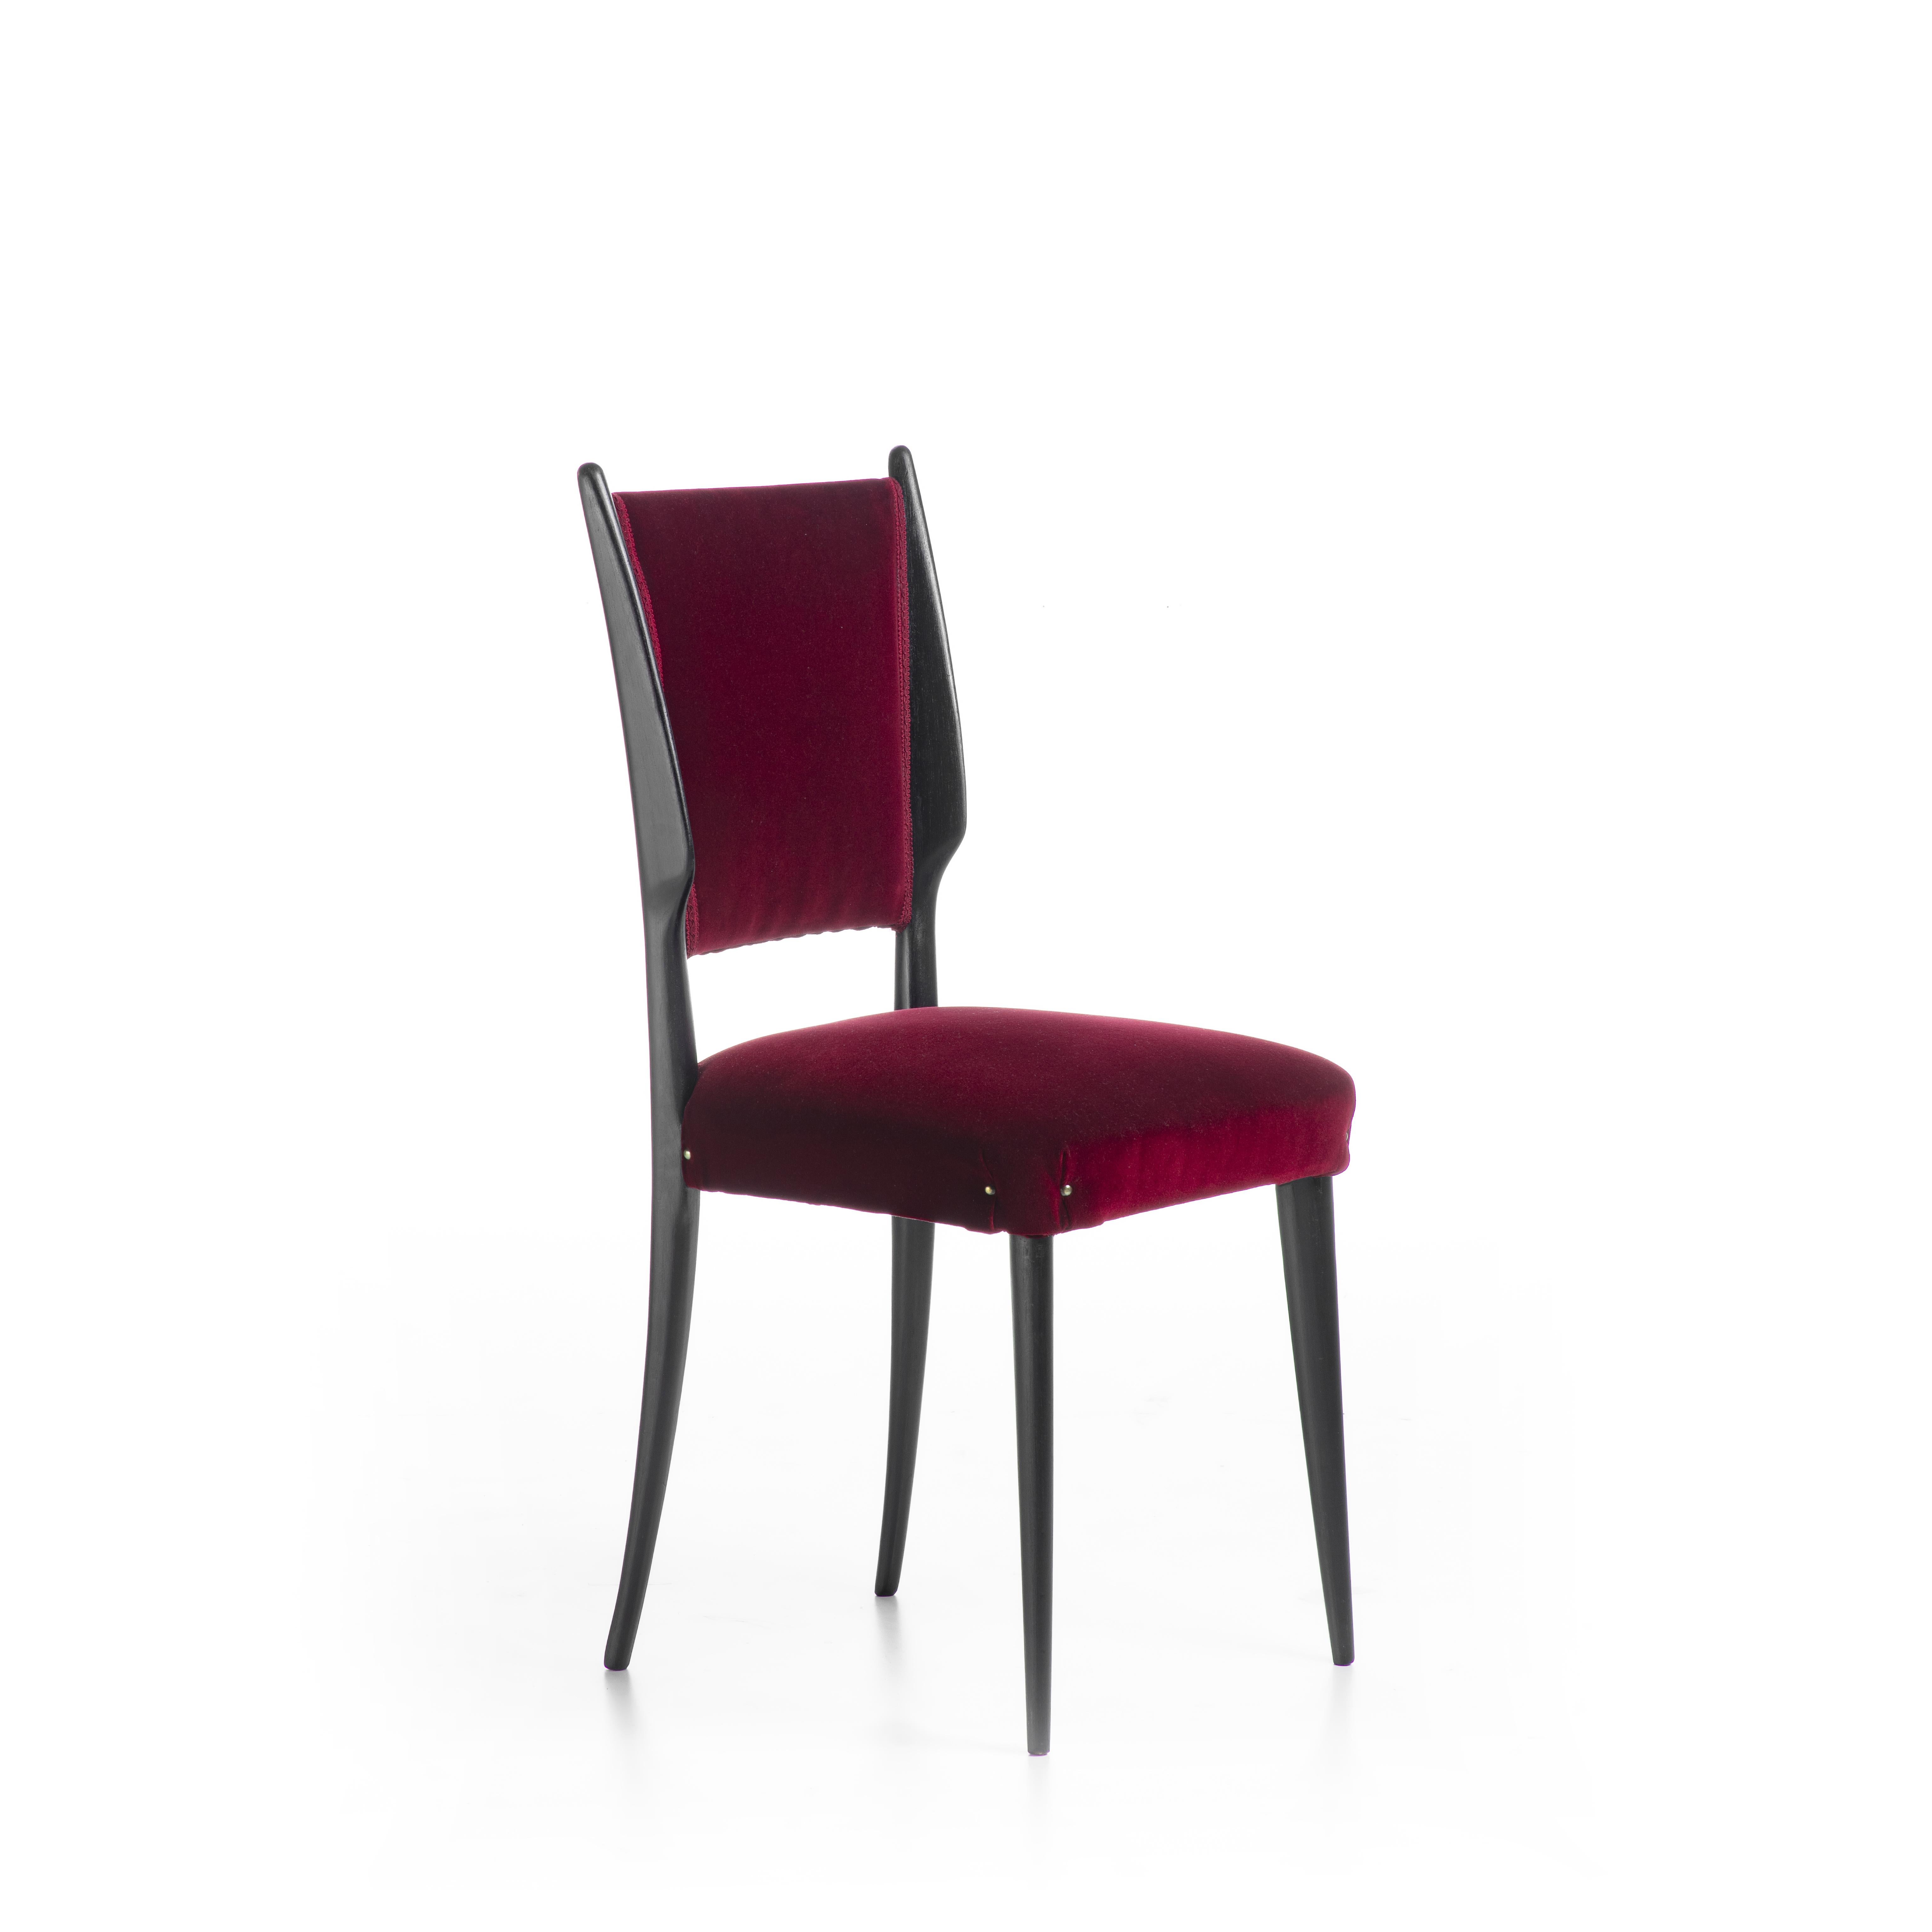 A chair made out of ribbed wood with strong lines. The structure is lacquered in opaque black, and its design is a take on vintage lines covered in red velvet, an emblem of the sophistication of the handmade chair. VELVET has a defined figure that